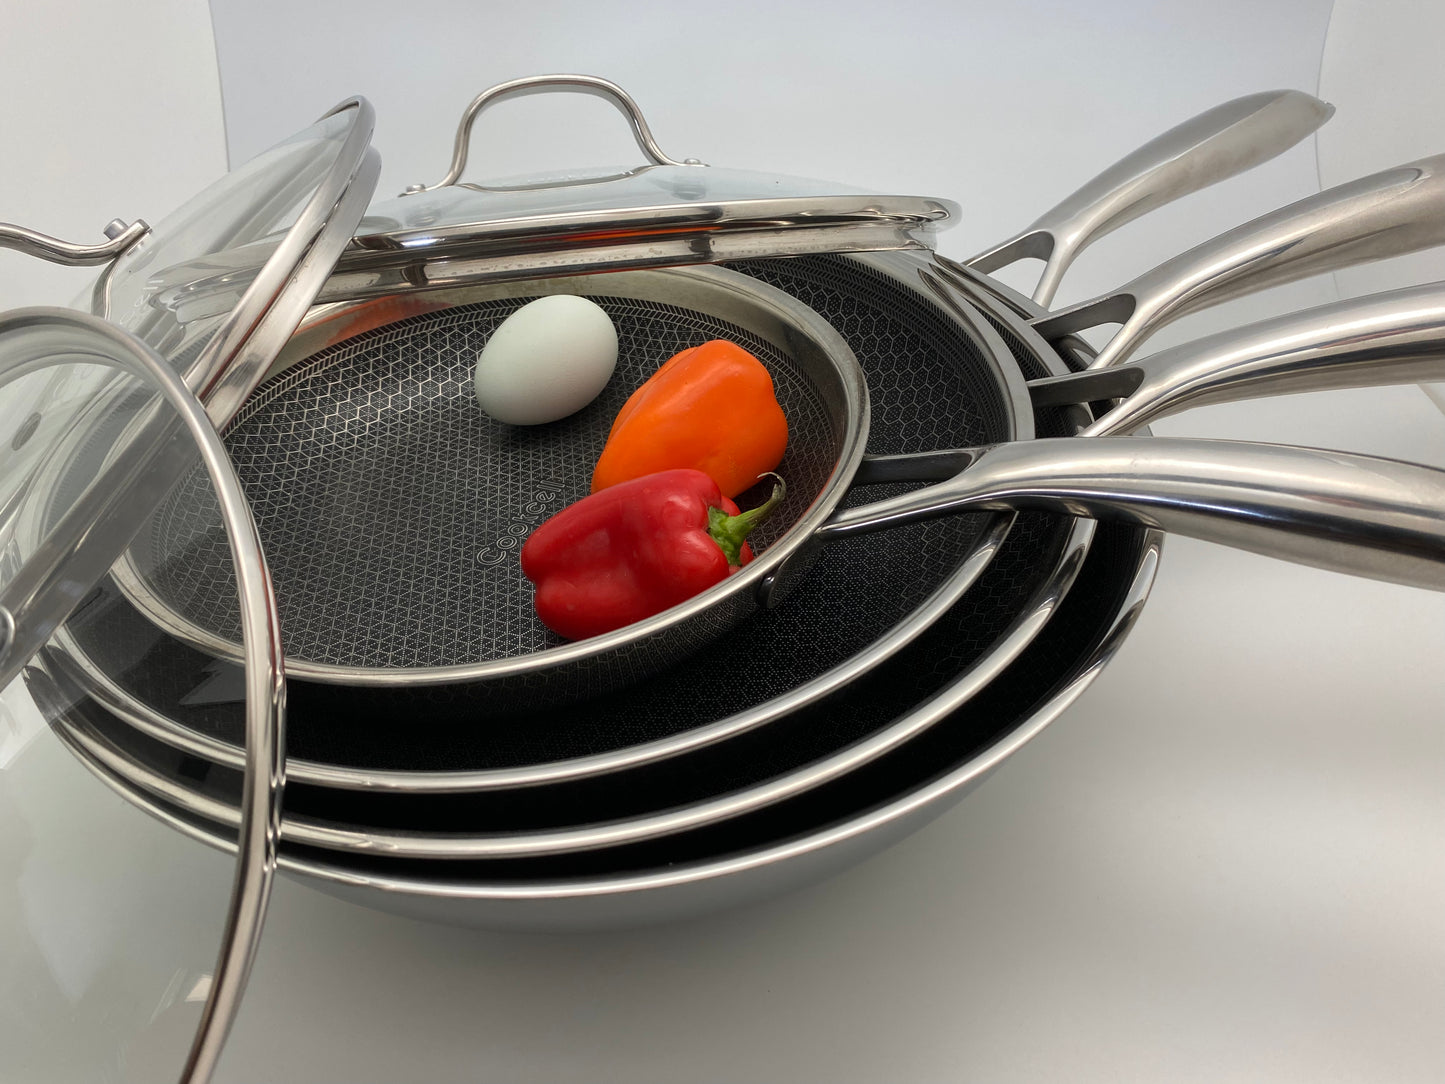 Cook Cell Set - Fry Pan and Wok